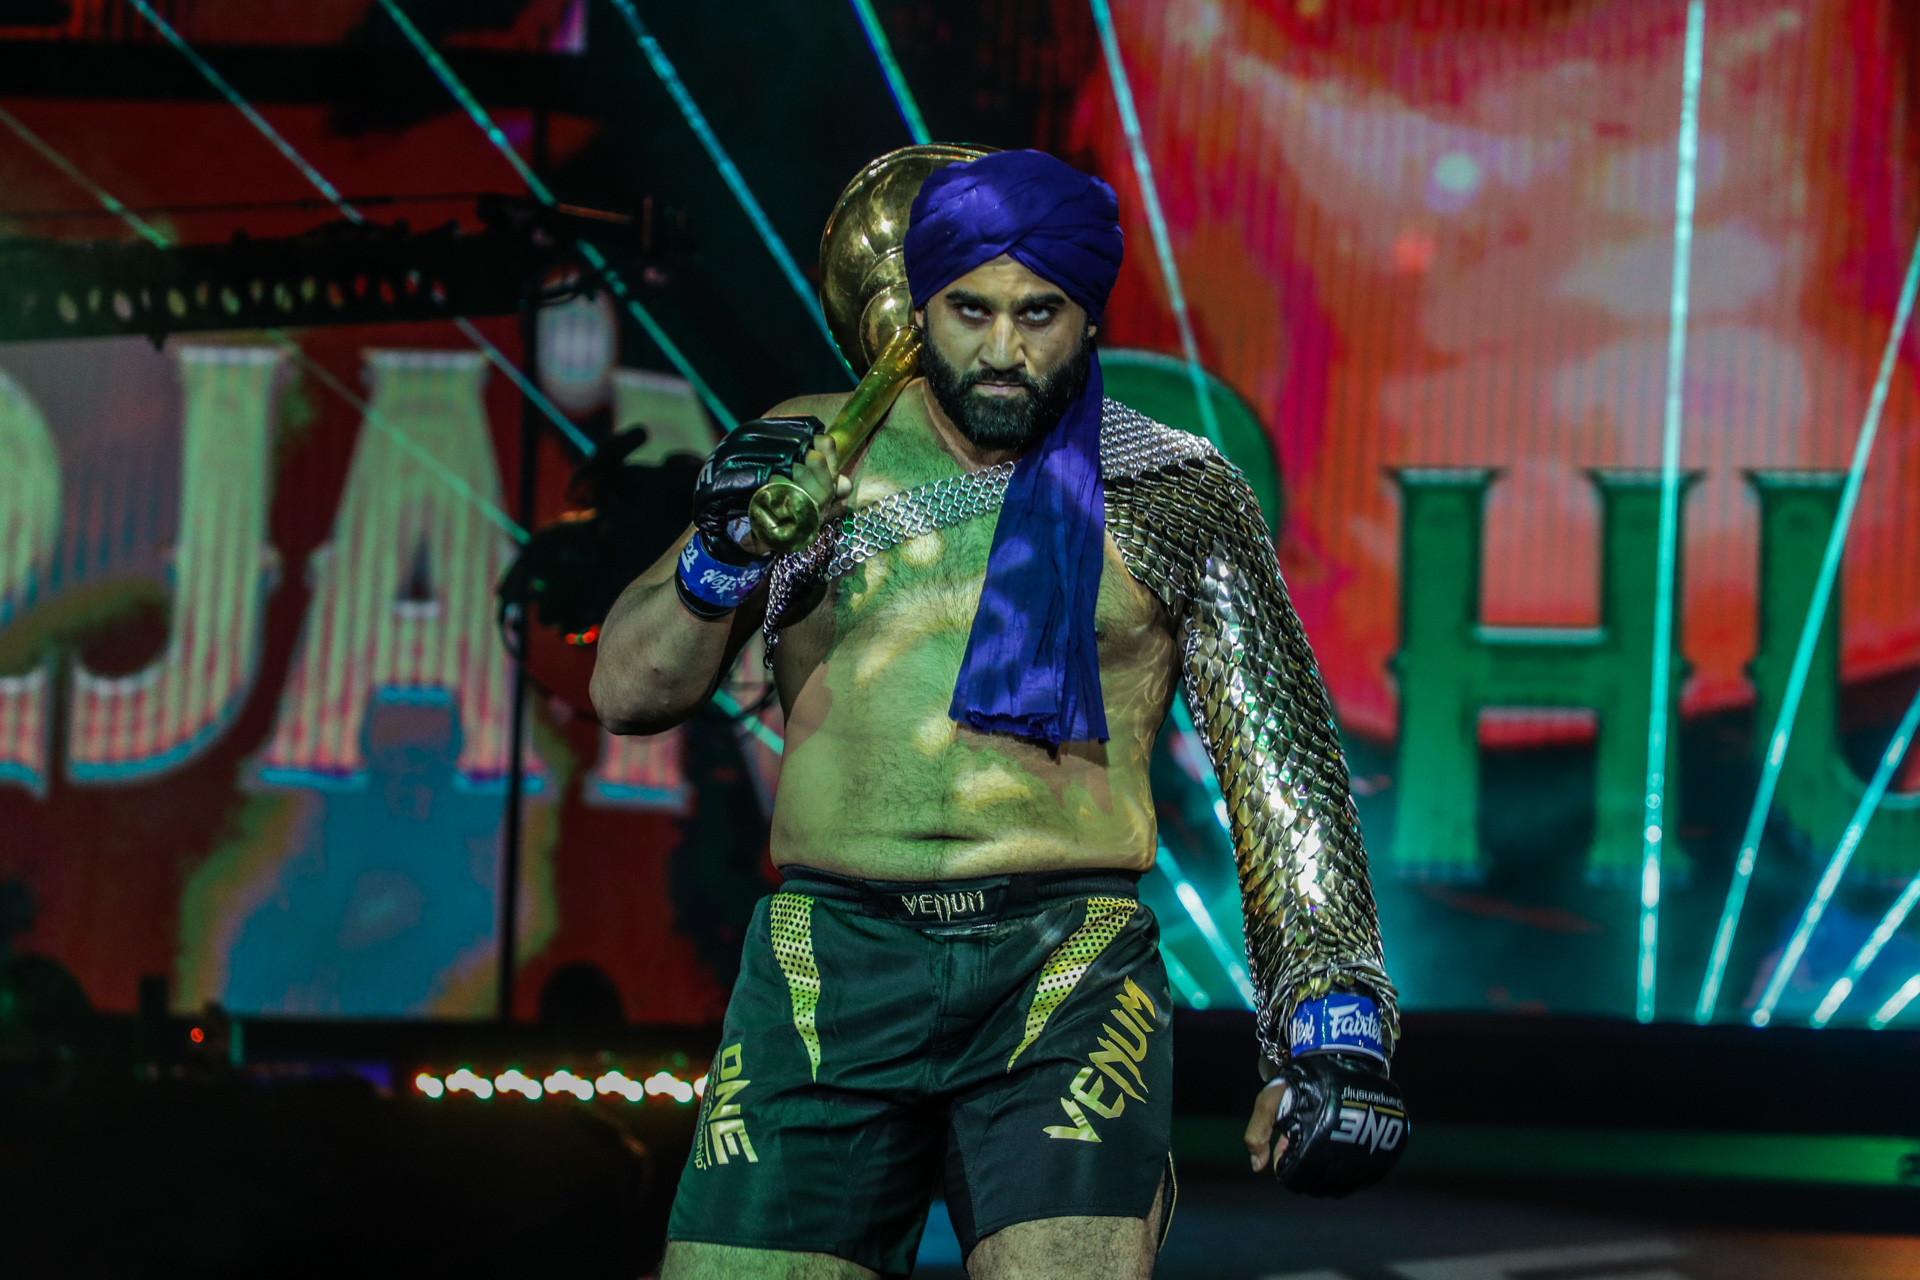 Scenes from the ONE Heavyweight World Title fight between Arjan Bhullar and Brandon Vera at ONE: DANGAL on 15 May